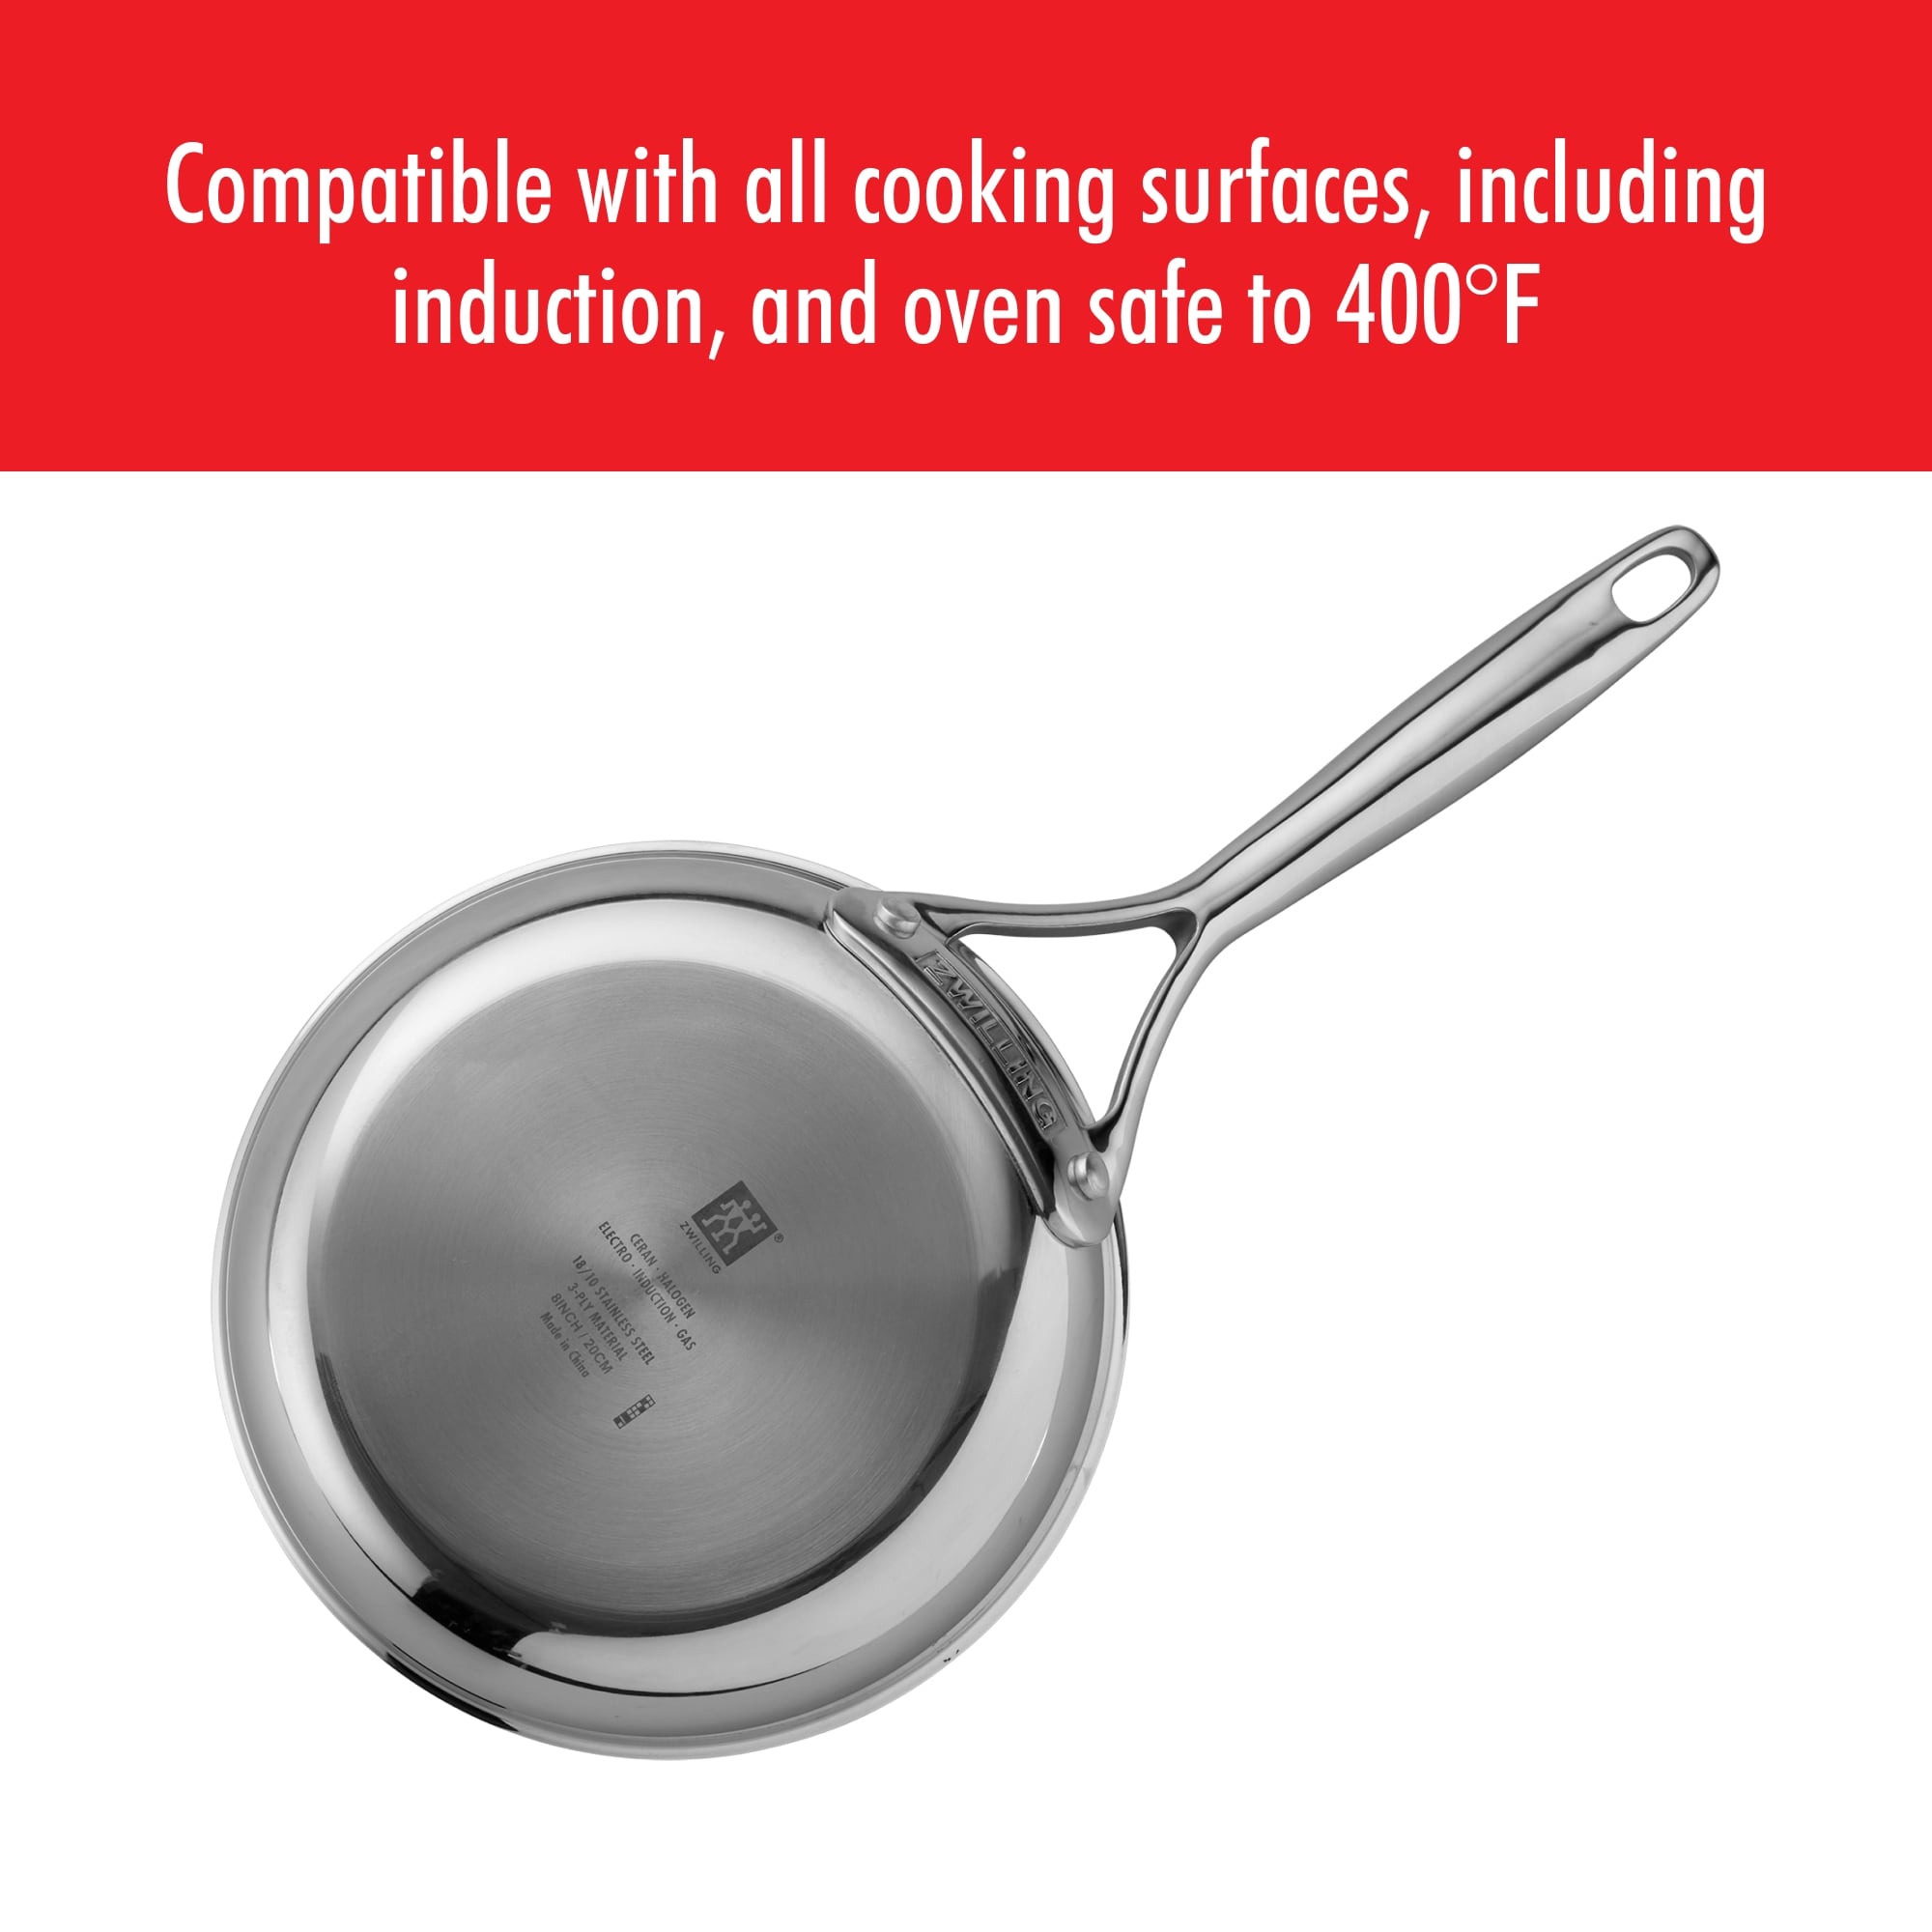 https://ak1.ostkcdn.com/images/products/is/images/direct/6a88453f6333f4e13fb6e603627591f3c76d07d4/ZWILLING-Energy-Plus-8-inch-Stainless-Steel-Ceramic-Nonstick-Fry-Pan.jpg